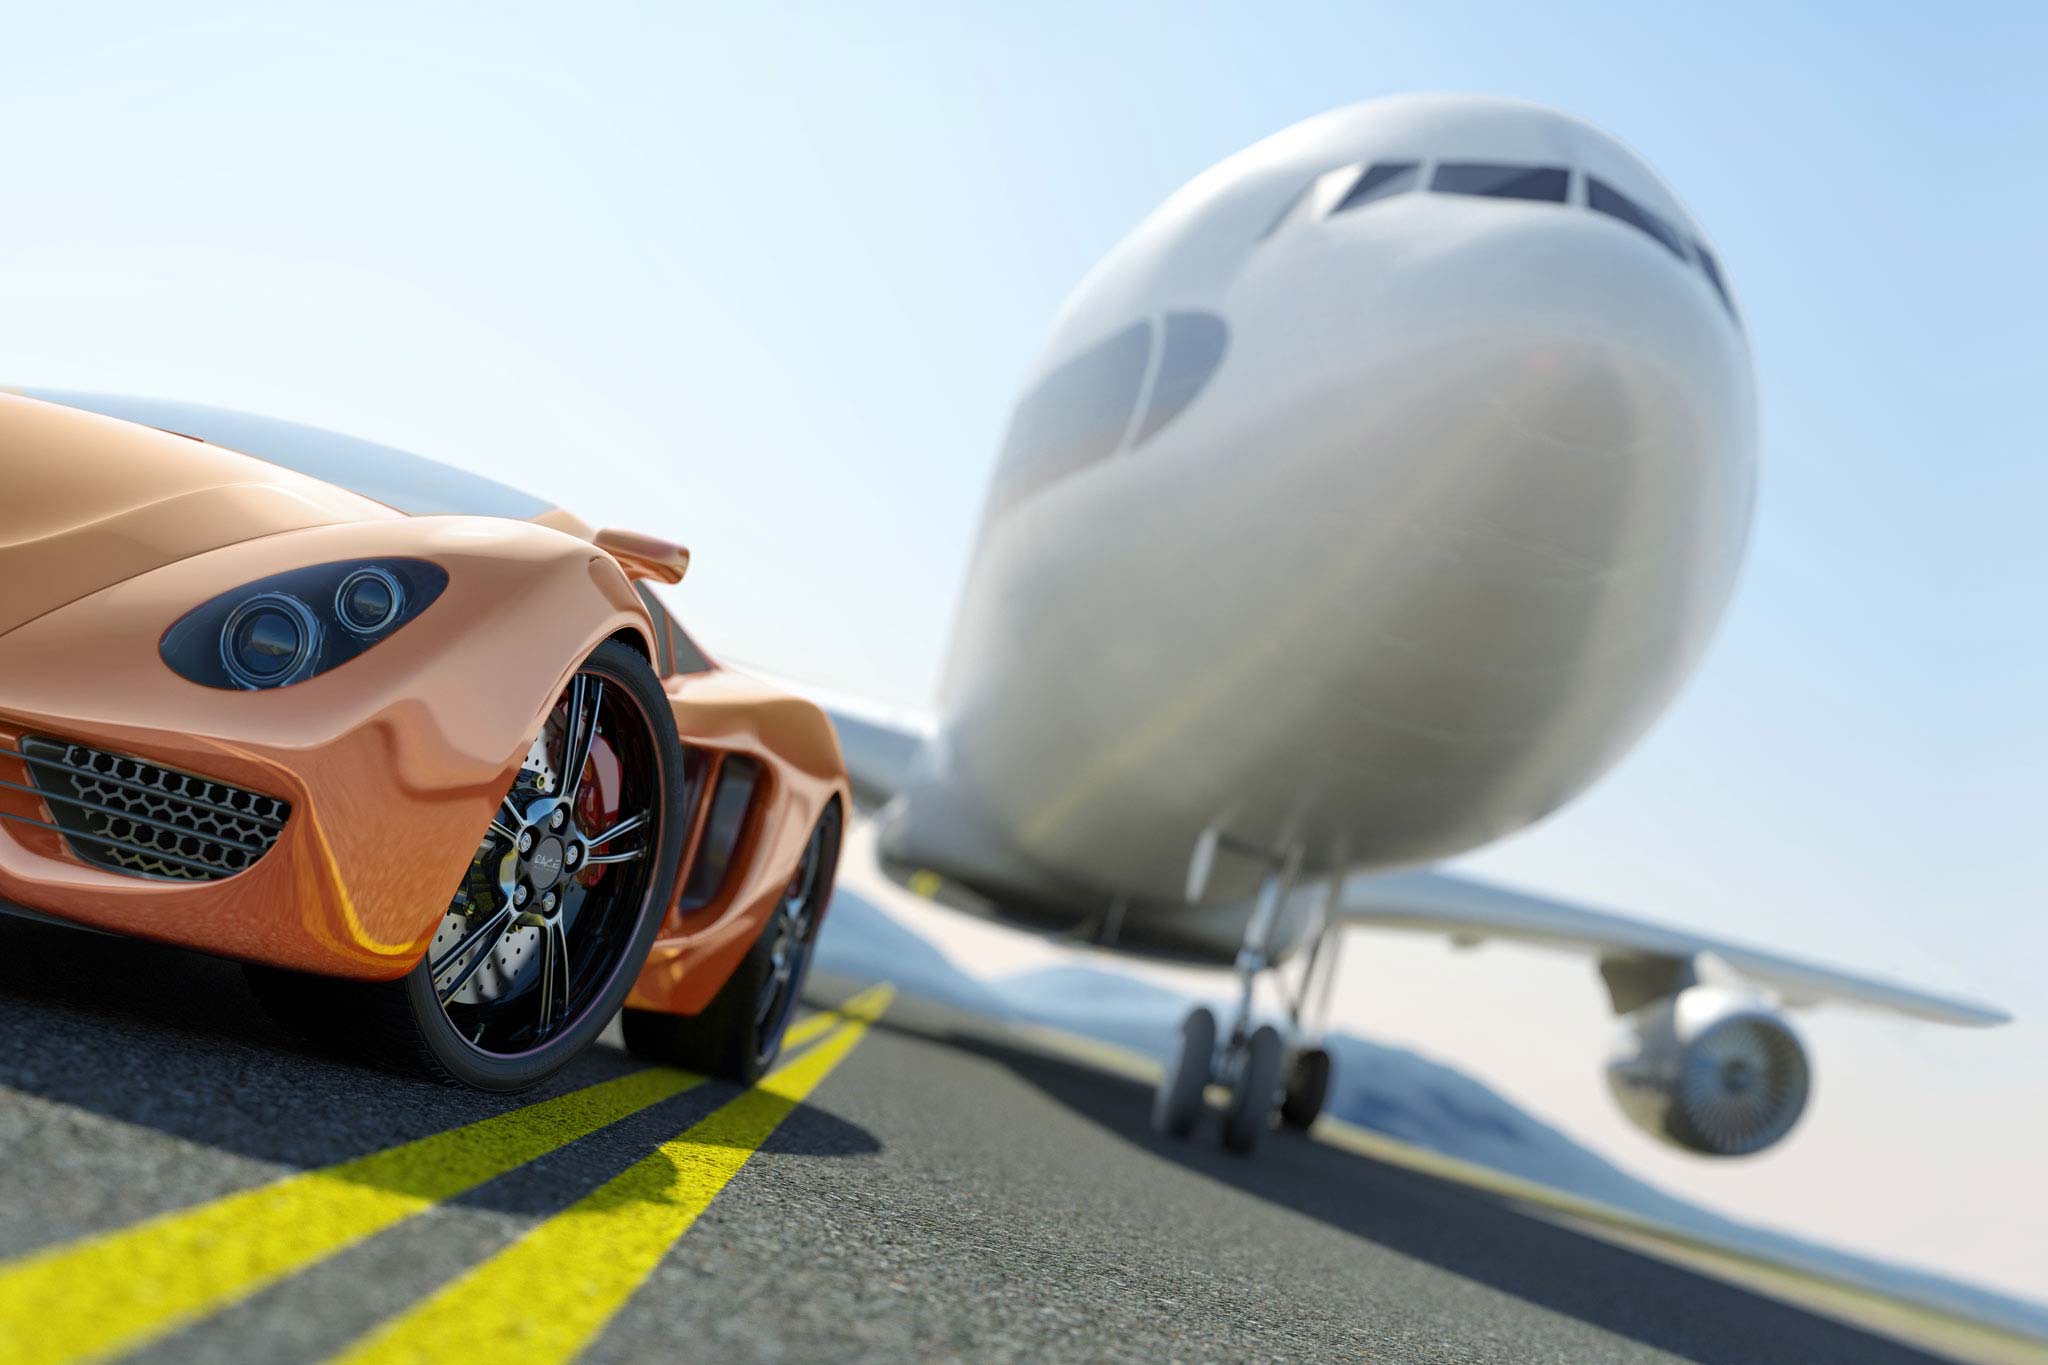 The picture shows an aeroplane and a sports car as representatives of important titanium application sectors.